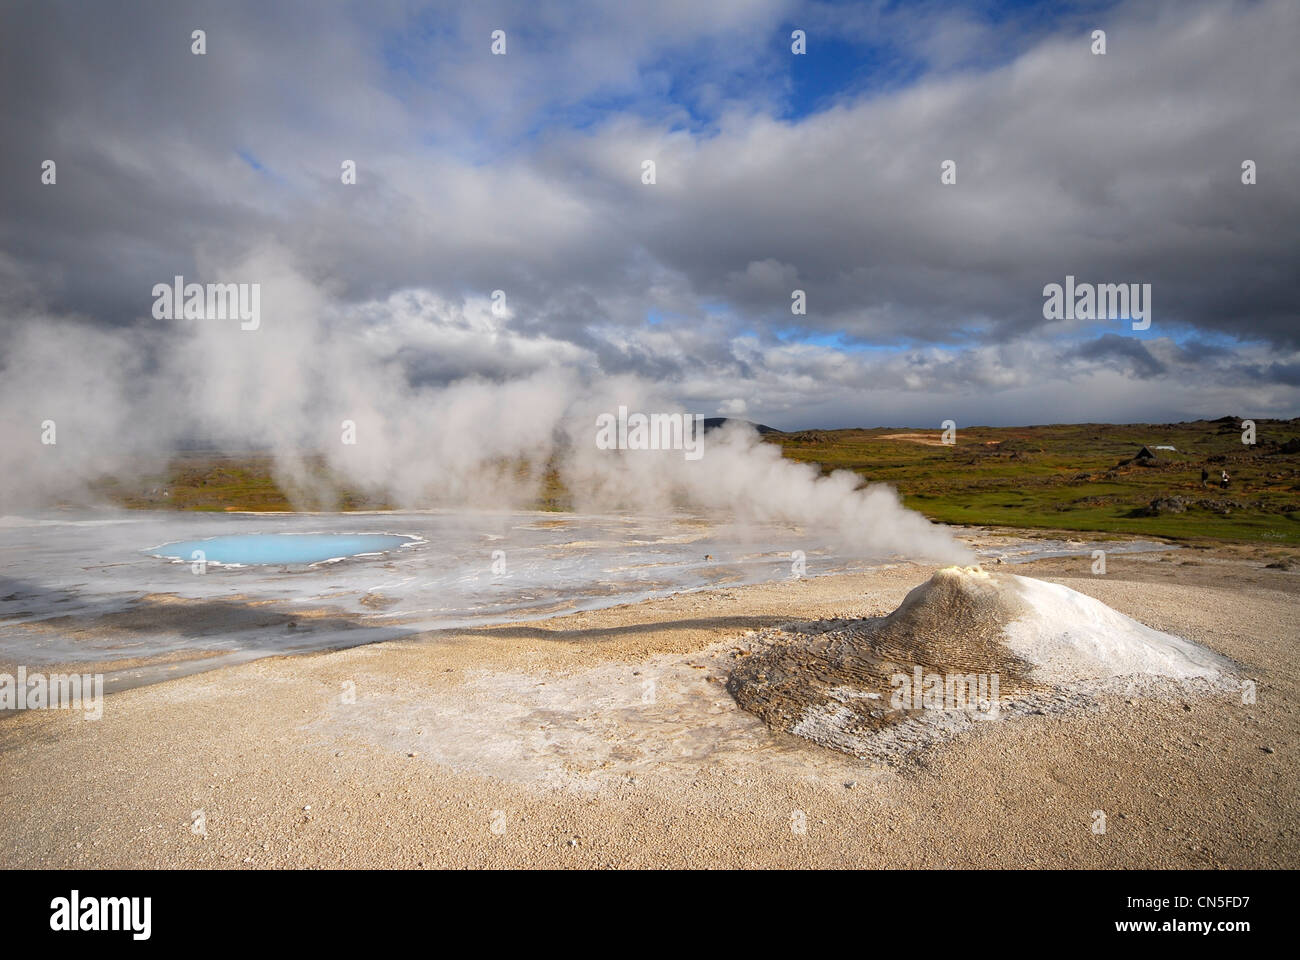 Iceland, Nordurland Vestra Region, Hveravellir, fumarole on a concretion of geyserite and spring of warm water opaline Stock Photo